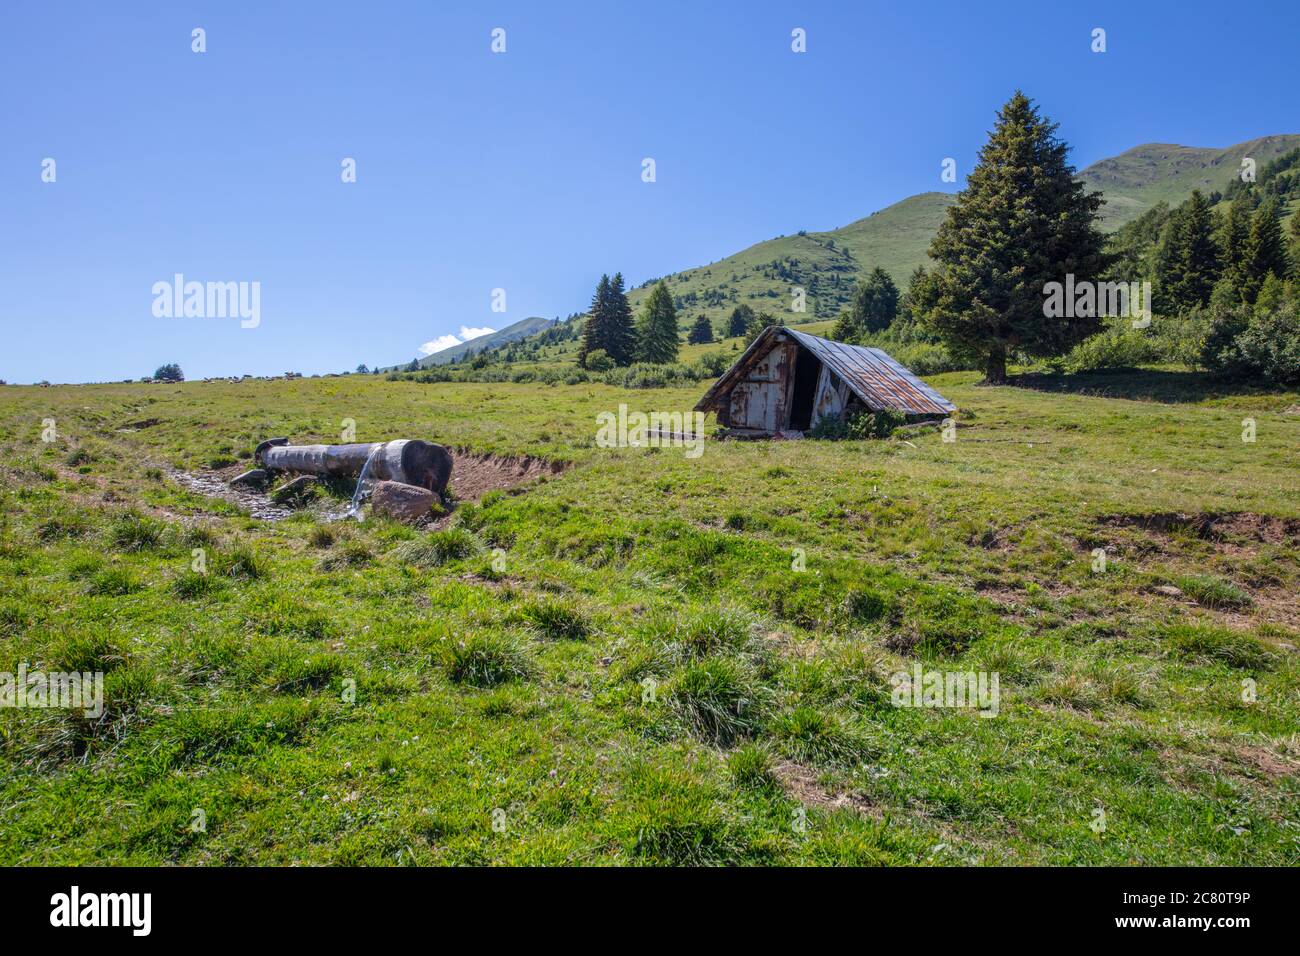 a hut in the mountain countryside, Tonale Est, Trentino, Italy Stock Photo